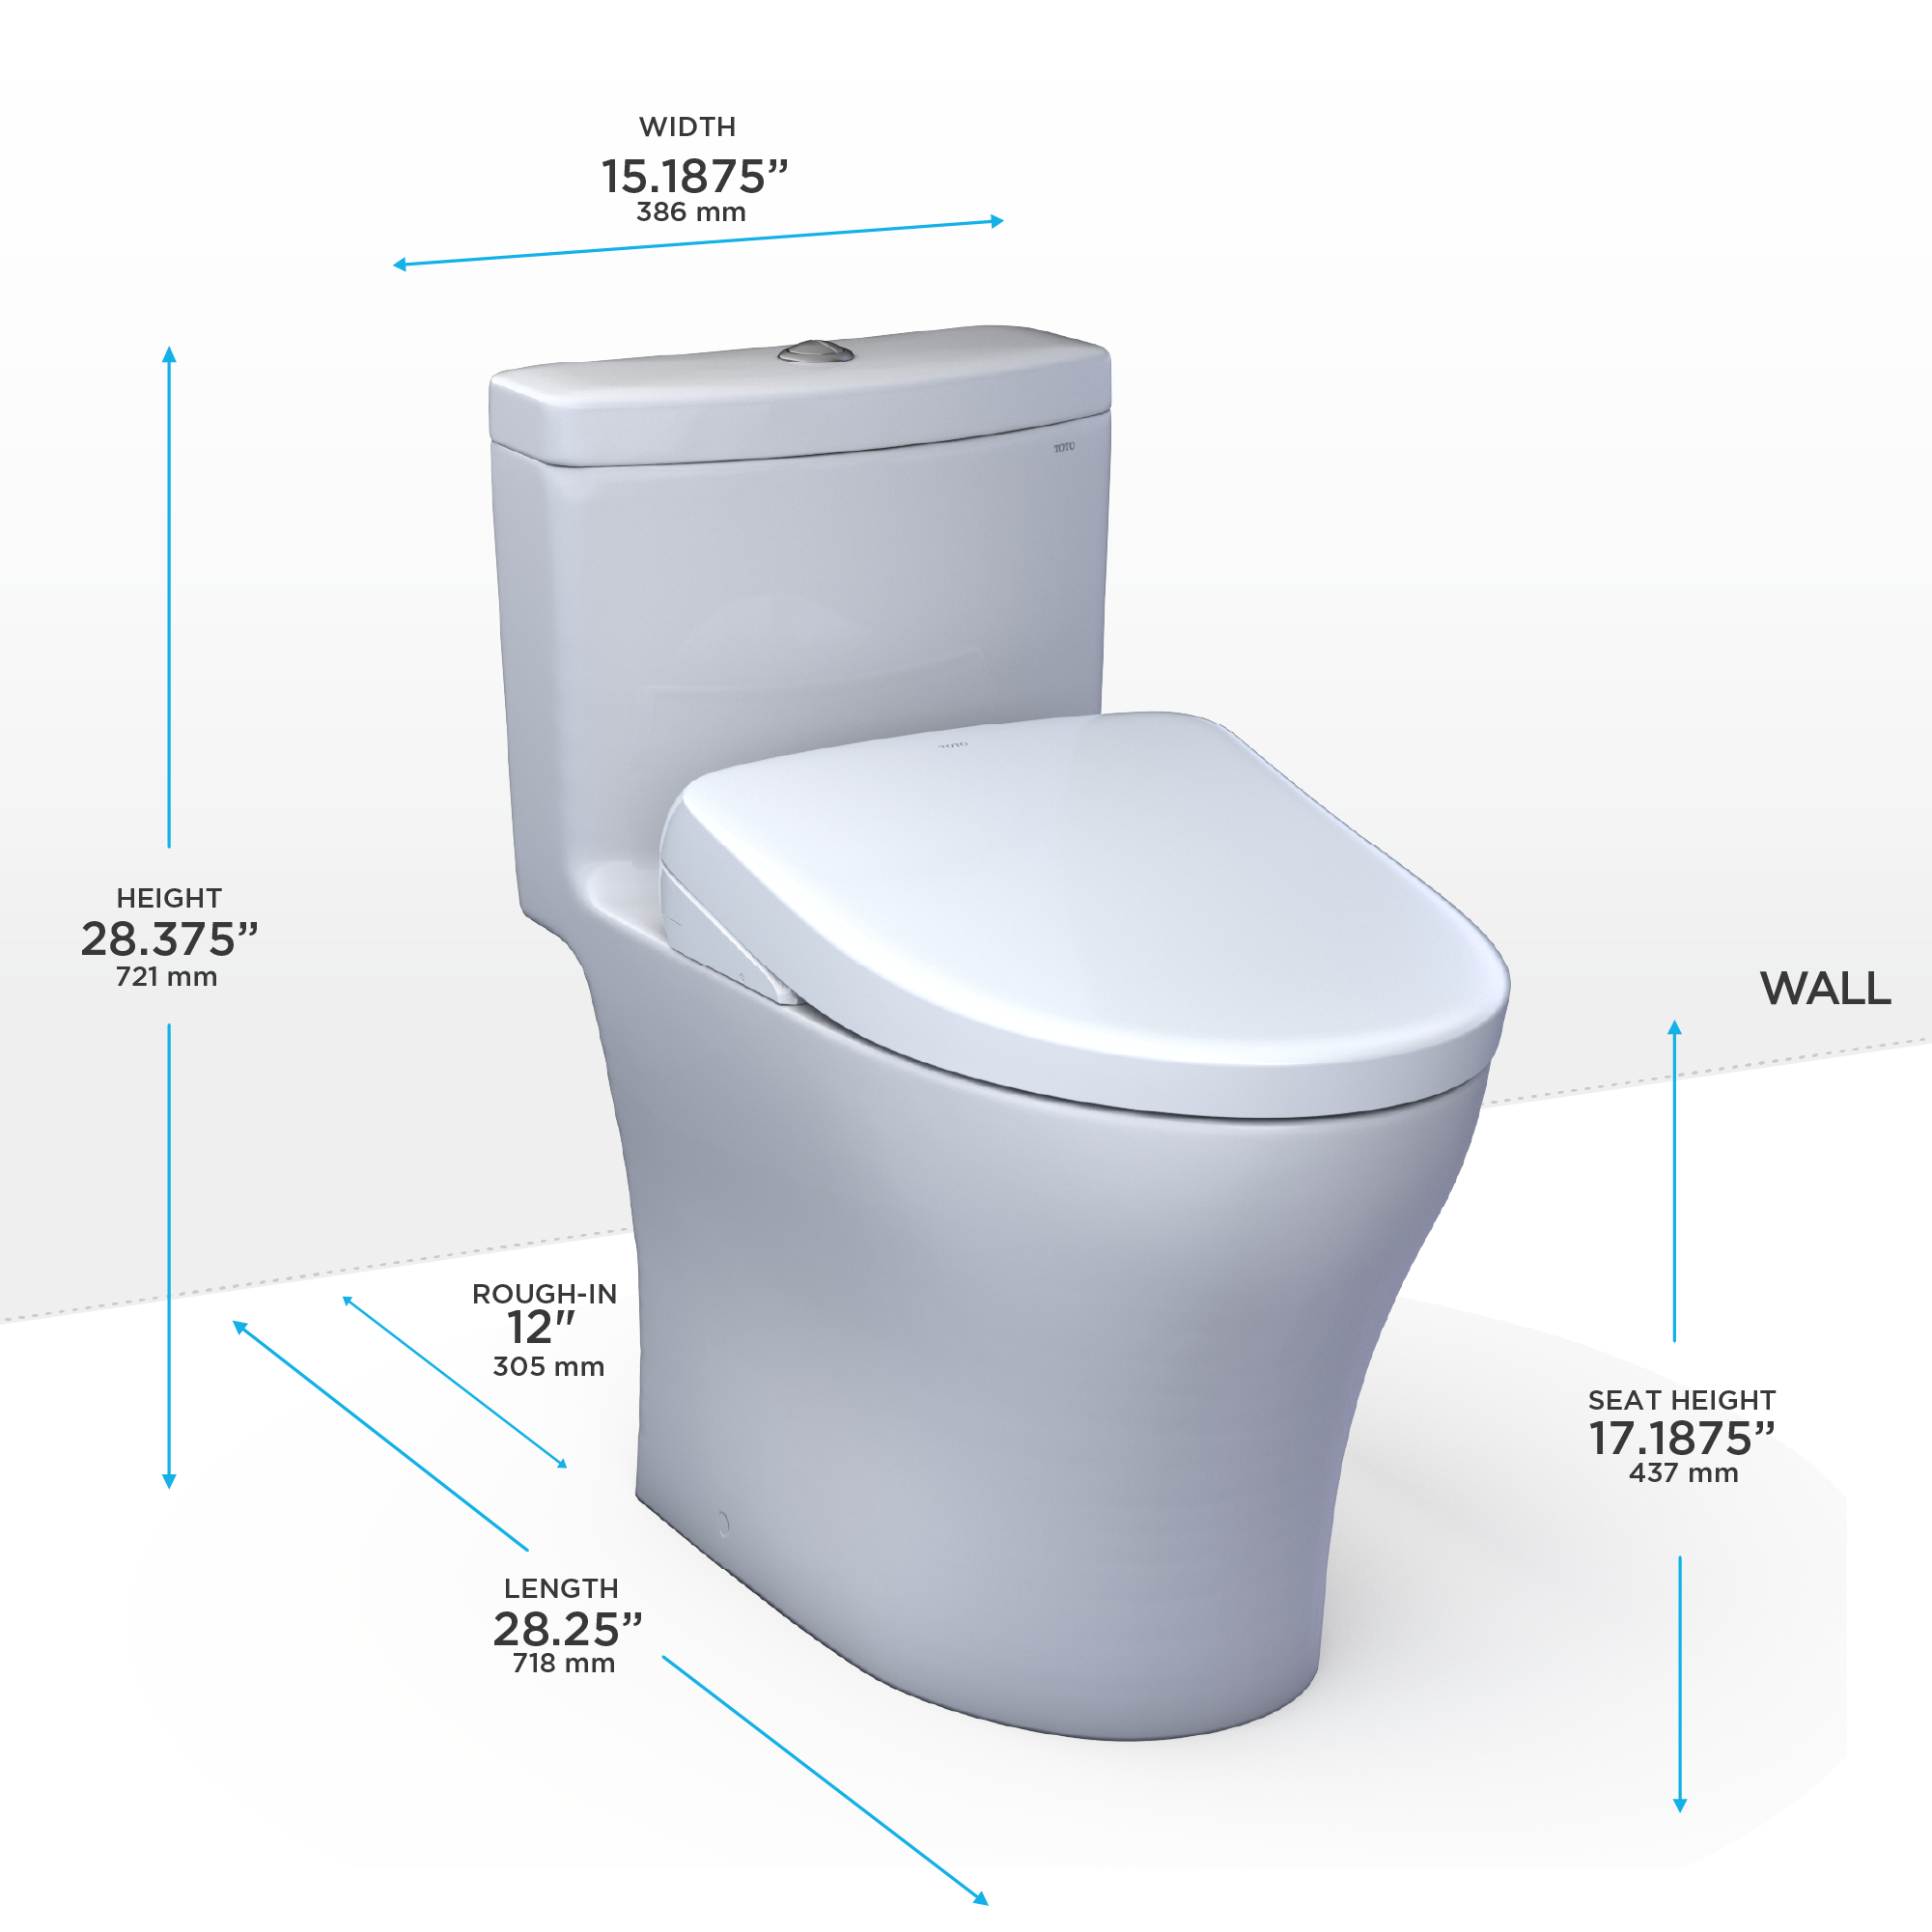 TOTO WASHLET+ Aquia IV One-Piece Elongated Dual Flush 1.28 and 0.9 GPF Toilet with S7 Contemporary Electric Bidet Seat, Cotton White - MW6464726CEMFGN#01, MW6464726CEMFGNA#01